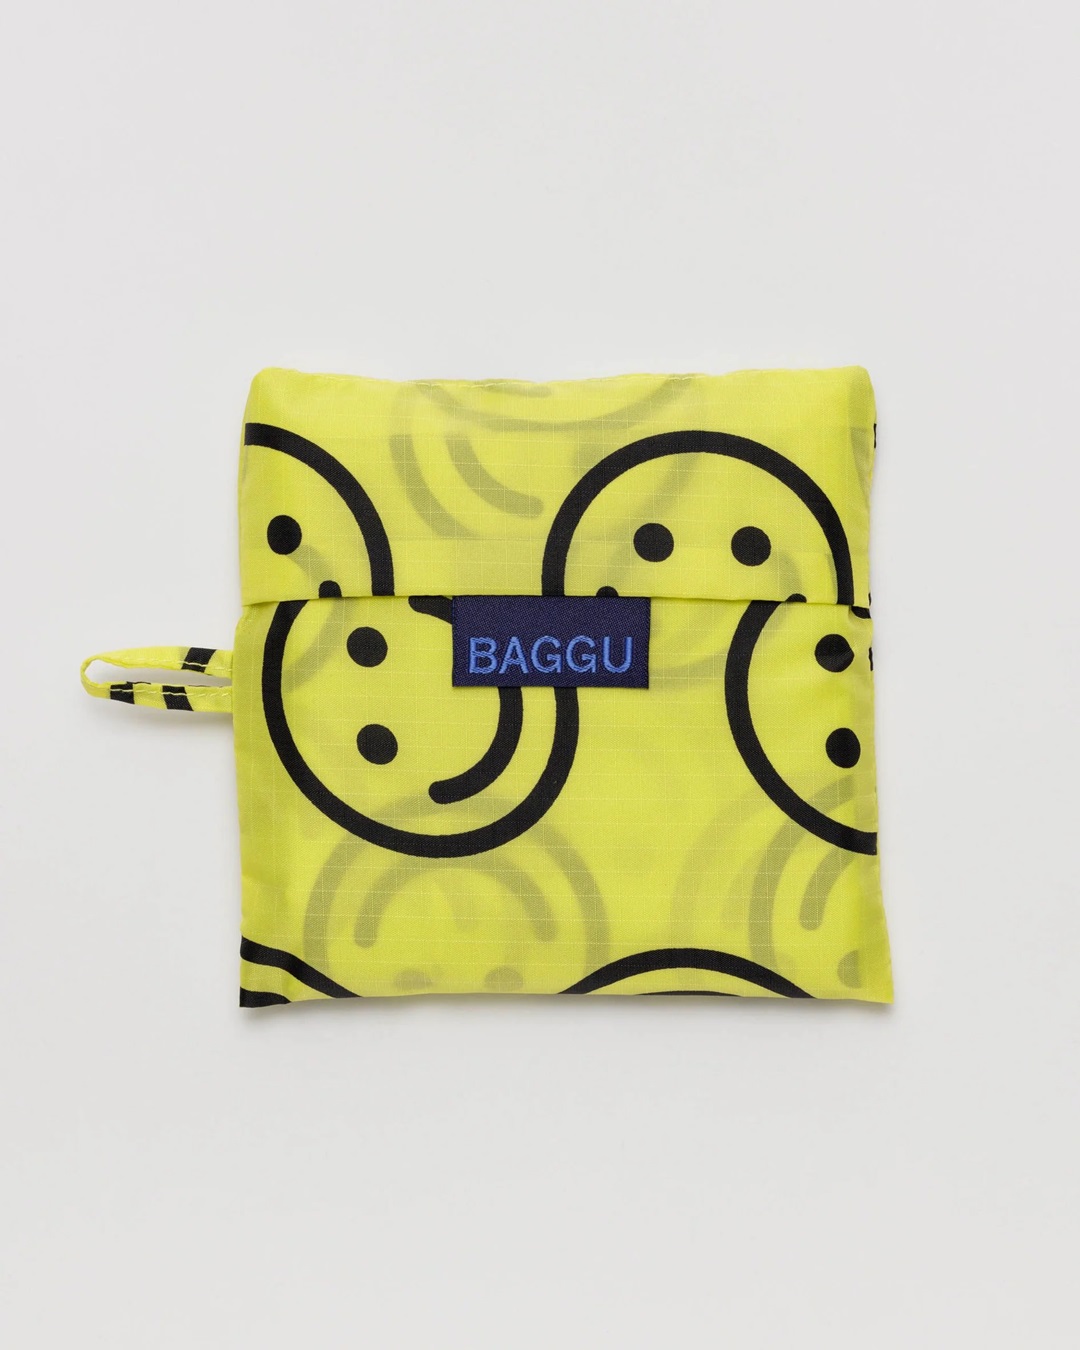 Yellow smiley face bag folded